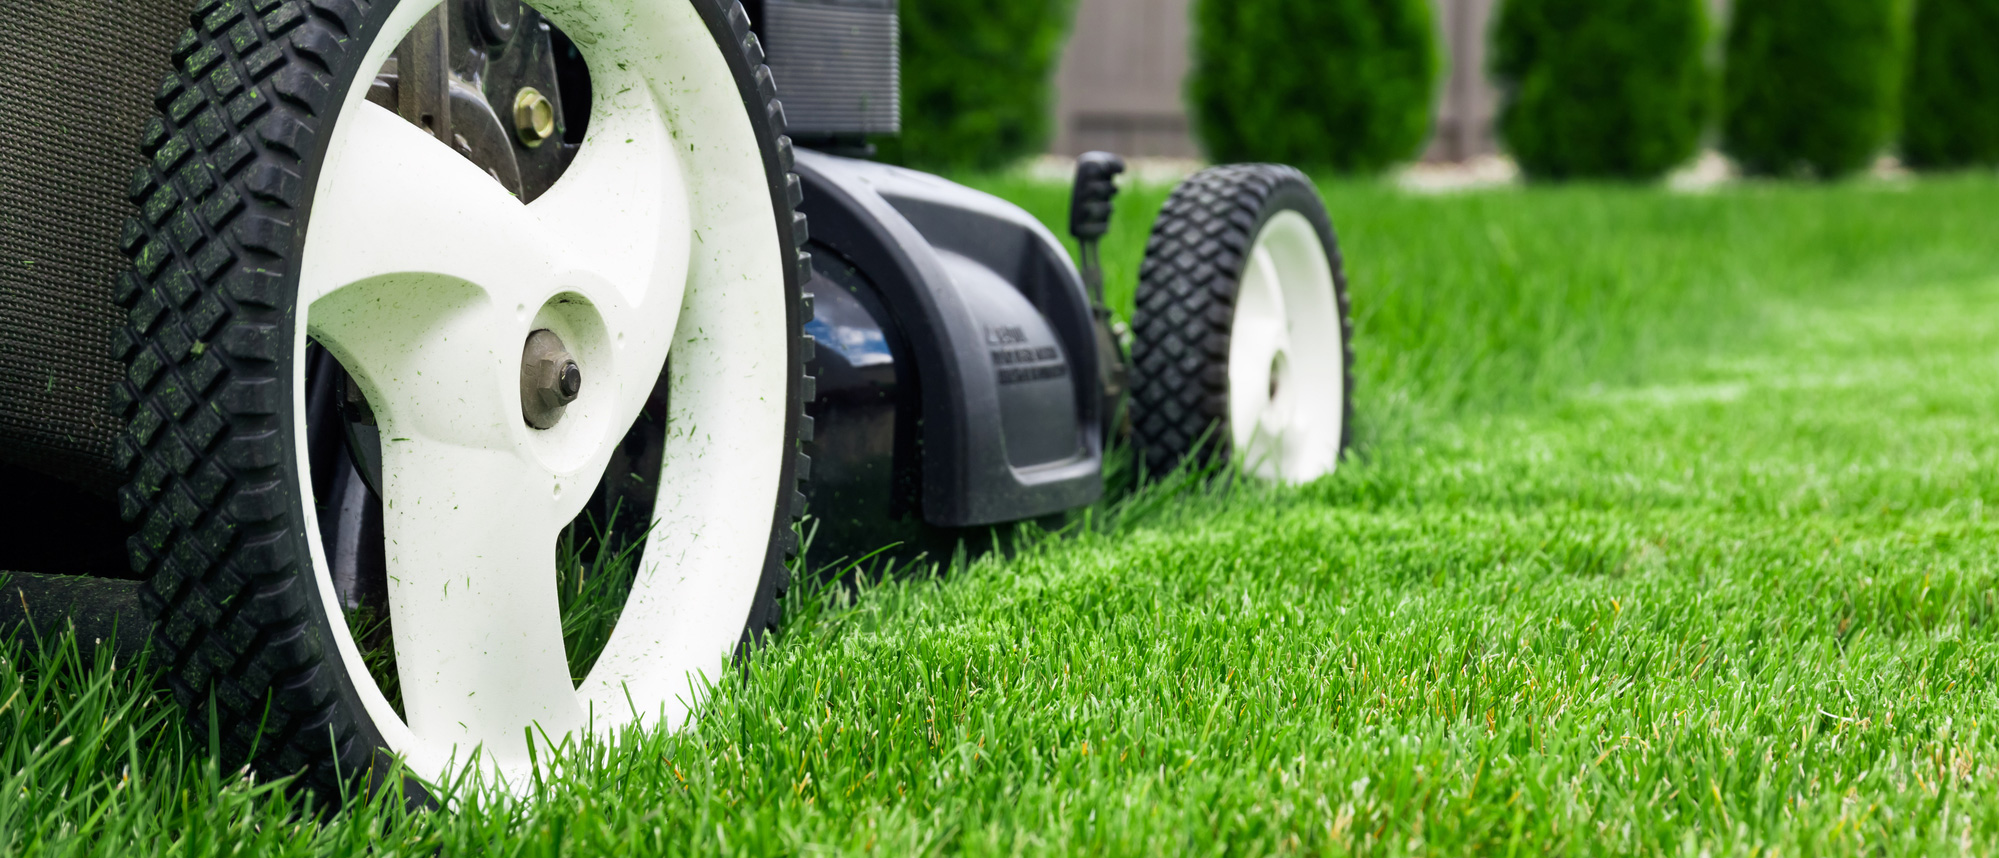 A lawnmower performing gardening and lawn care services.